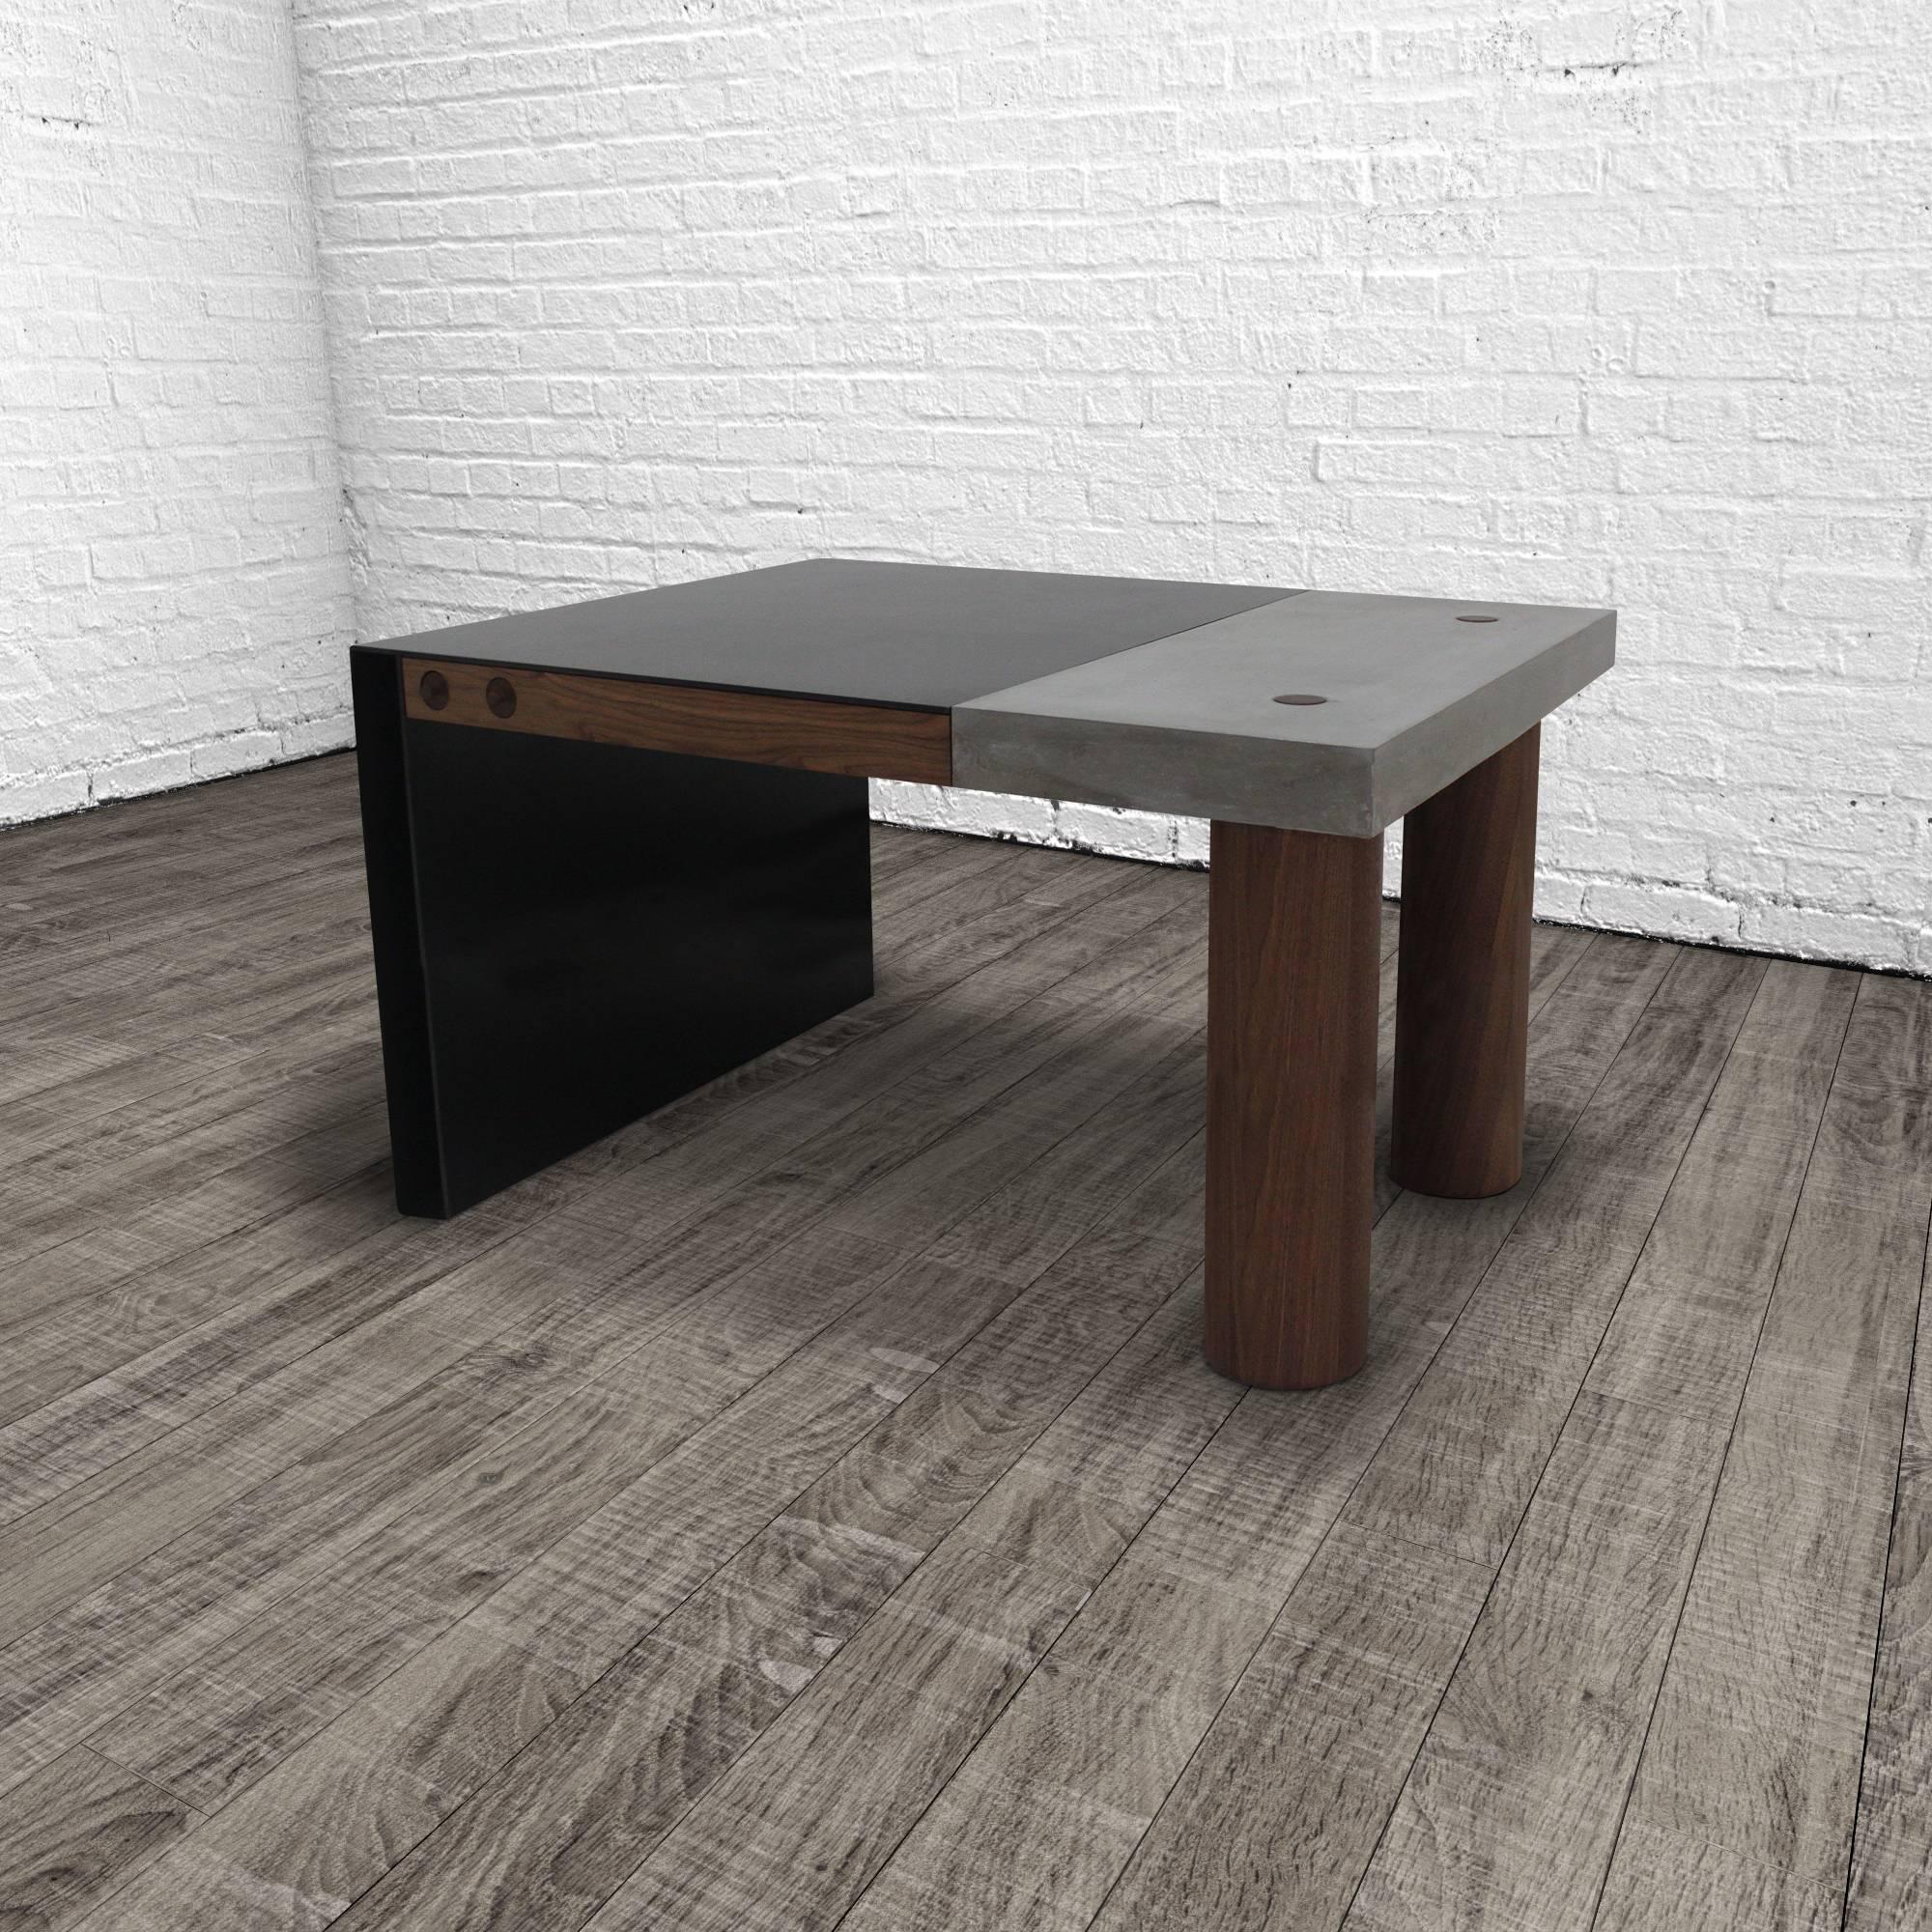 The paradigm desk seamlessly integrates three elemental materials, concrete, steel and wood. The combination of cast concrete with hand-turned walnut legs and thru-tenon joinery married to hand-blackened steel with an oil and wax finish make for a